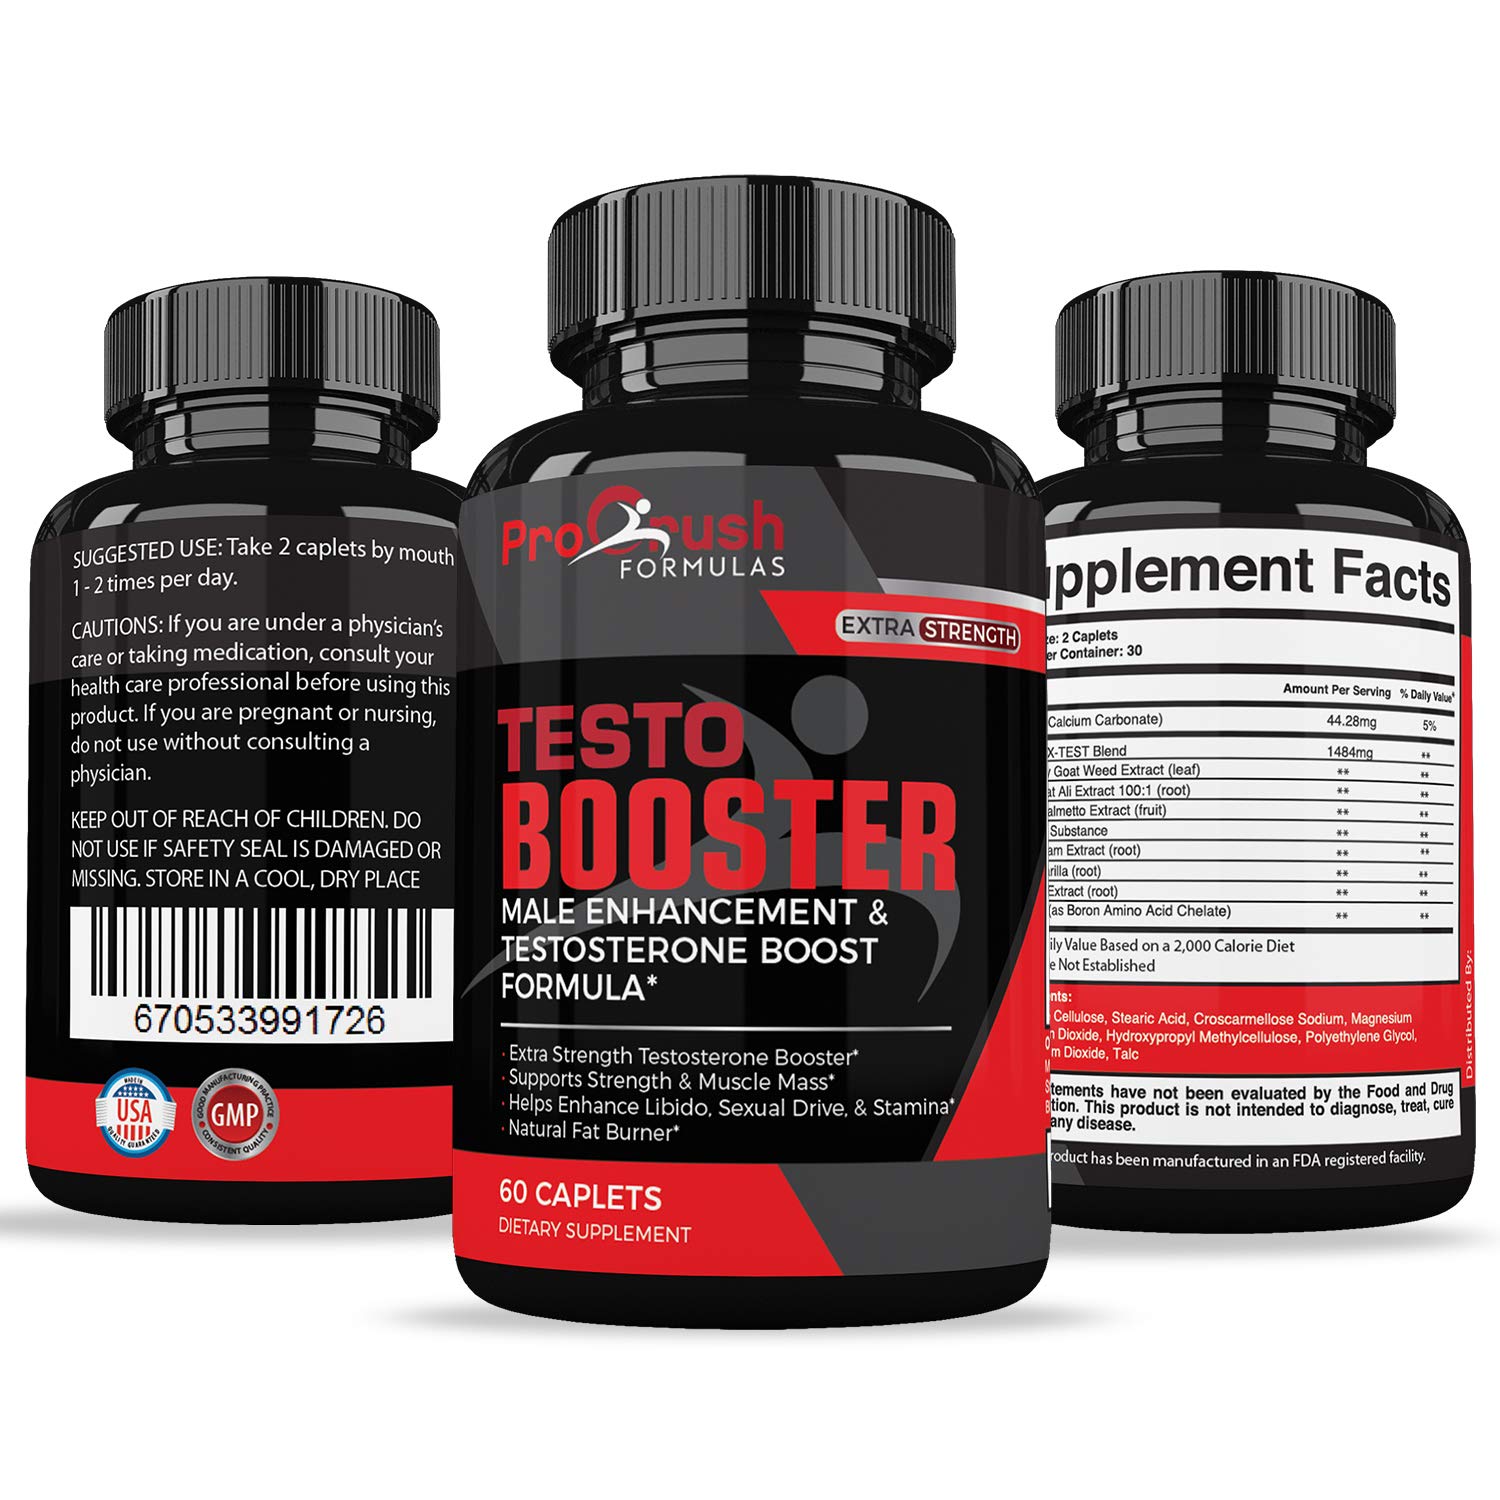 How to Find the Best Testosterone Booster Online? 